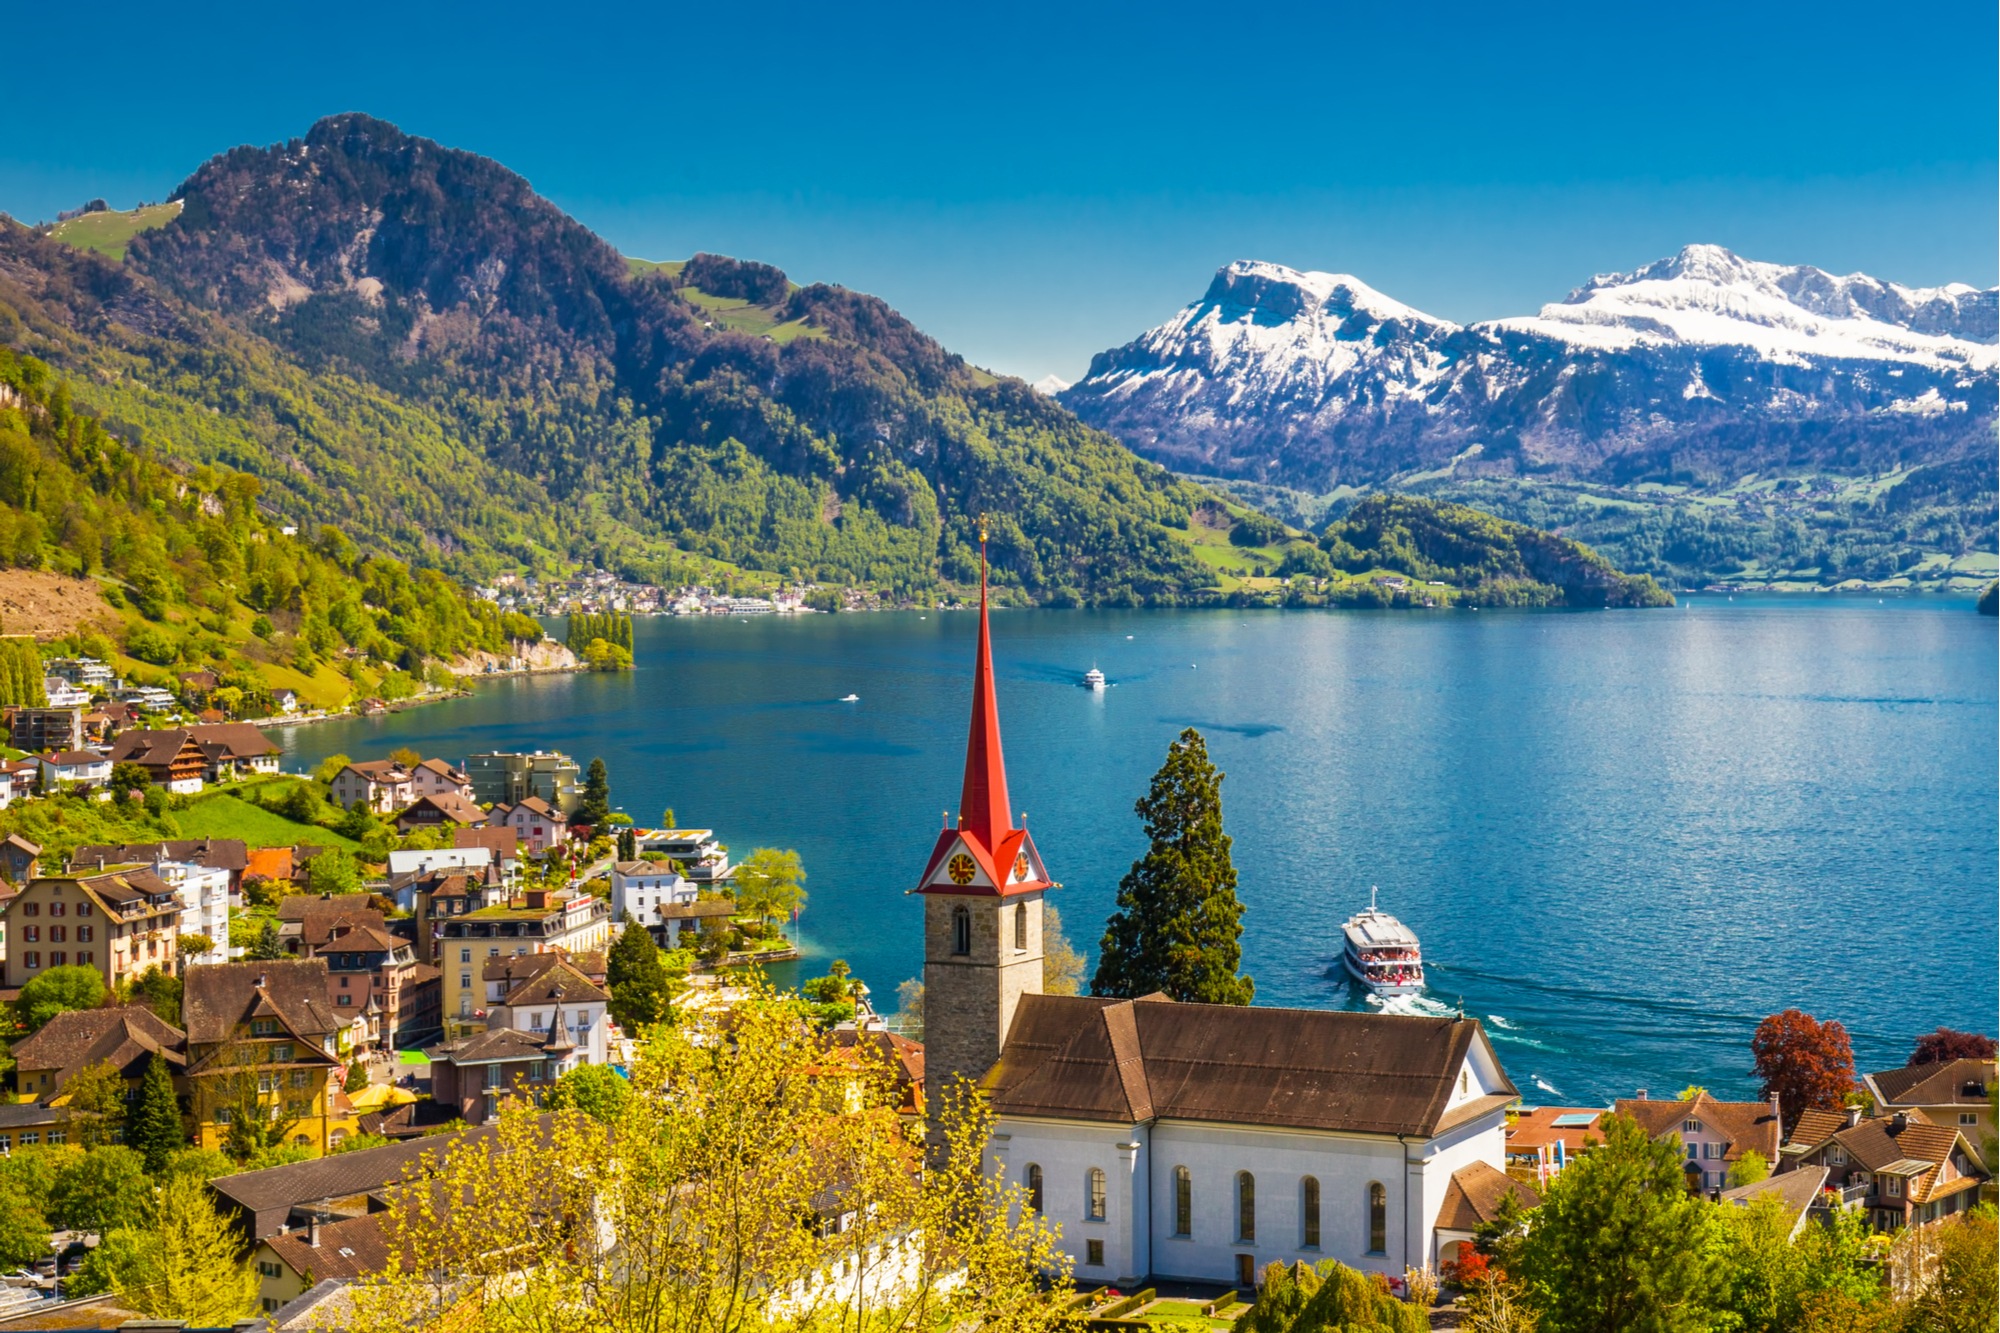 lake lucerne, switzerland. A lake in a beautiful setting with snow capped mountains in the background